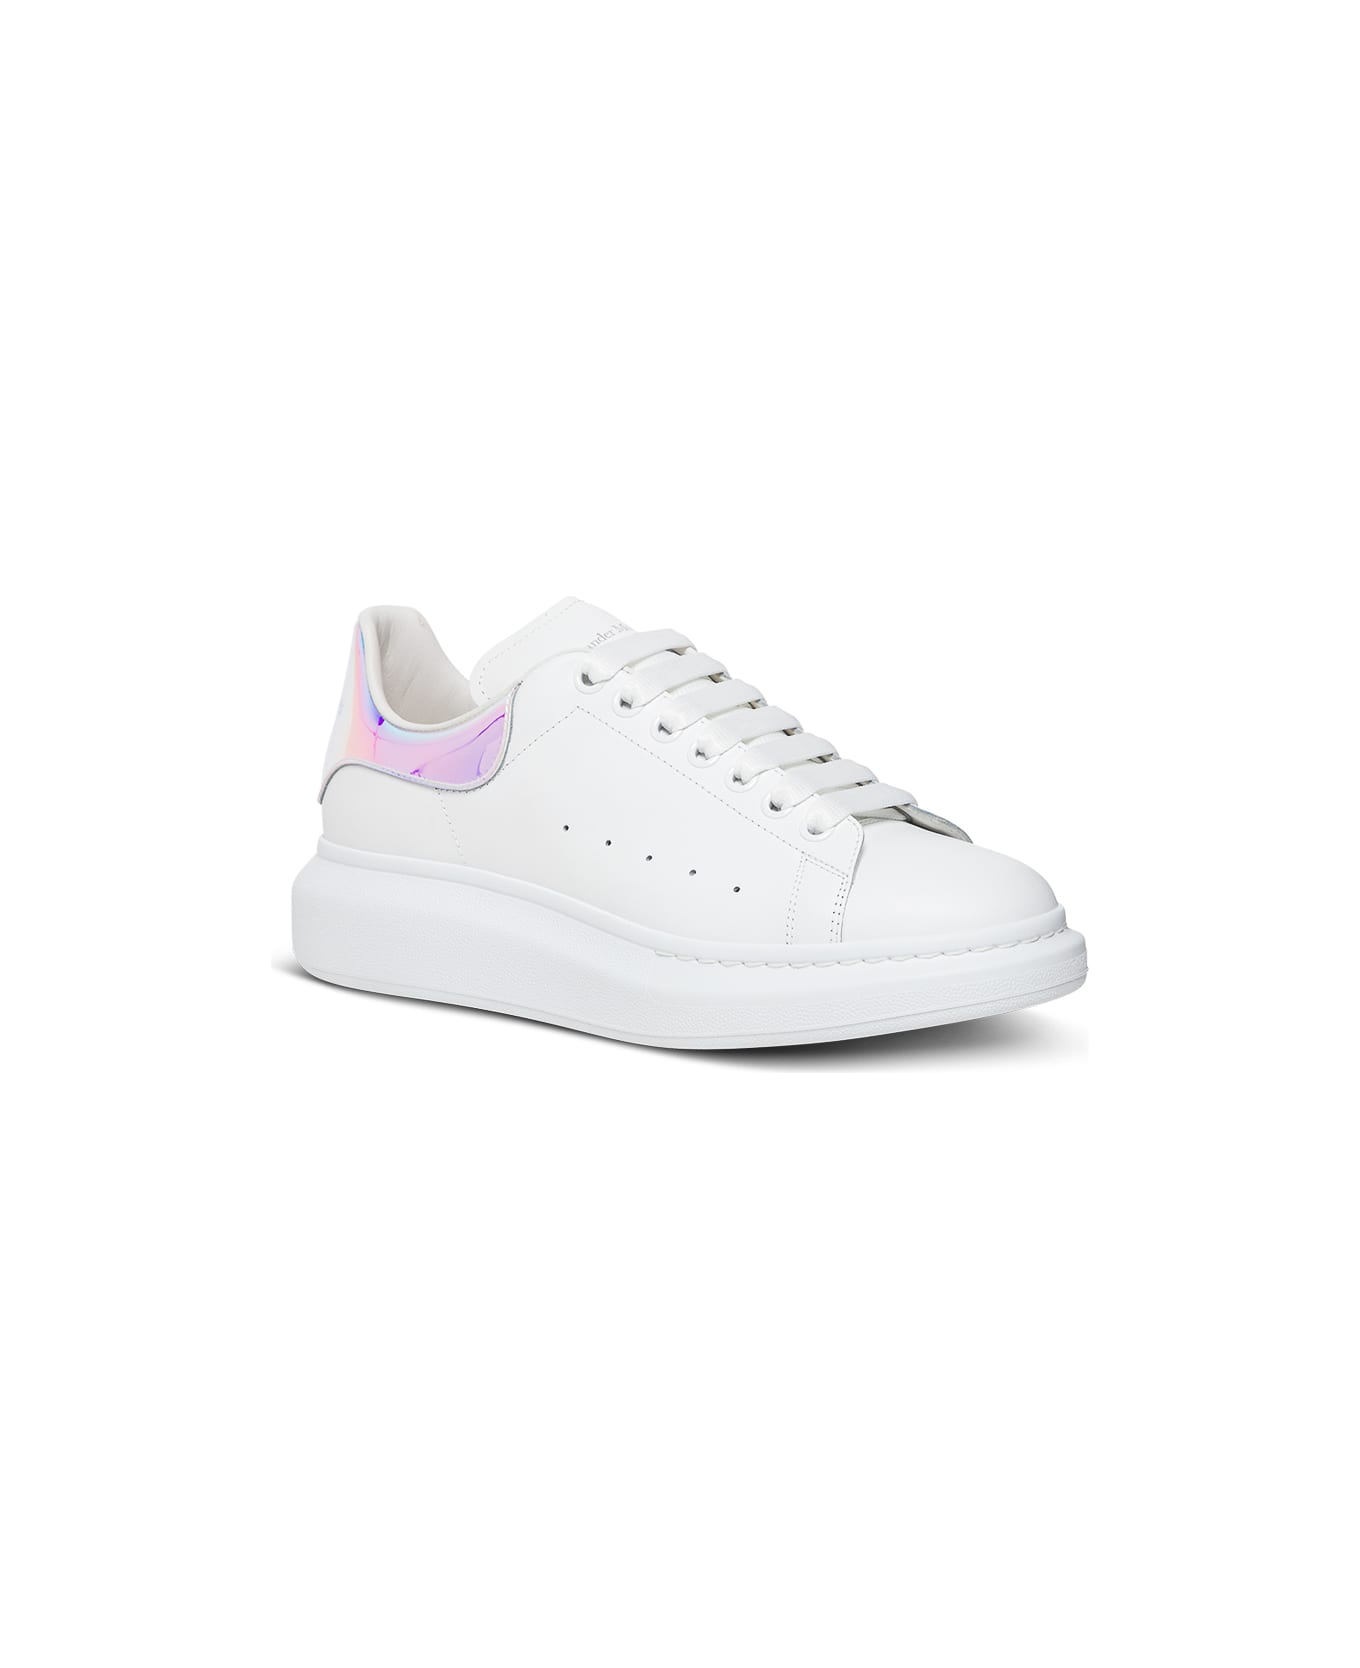 Alexander McQueen Woman's Oversize  White Leather Sneaker S With Contrasting Heel Tab - White